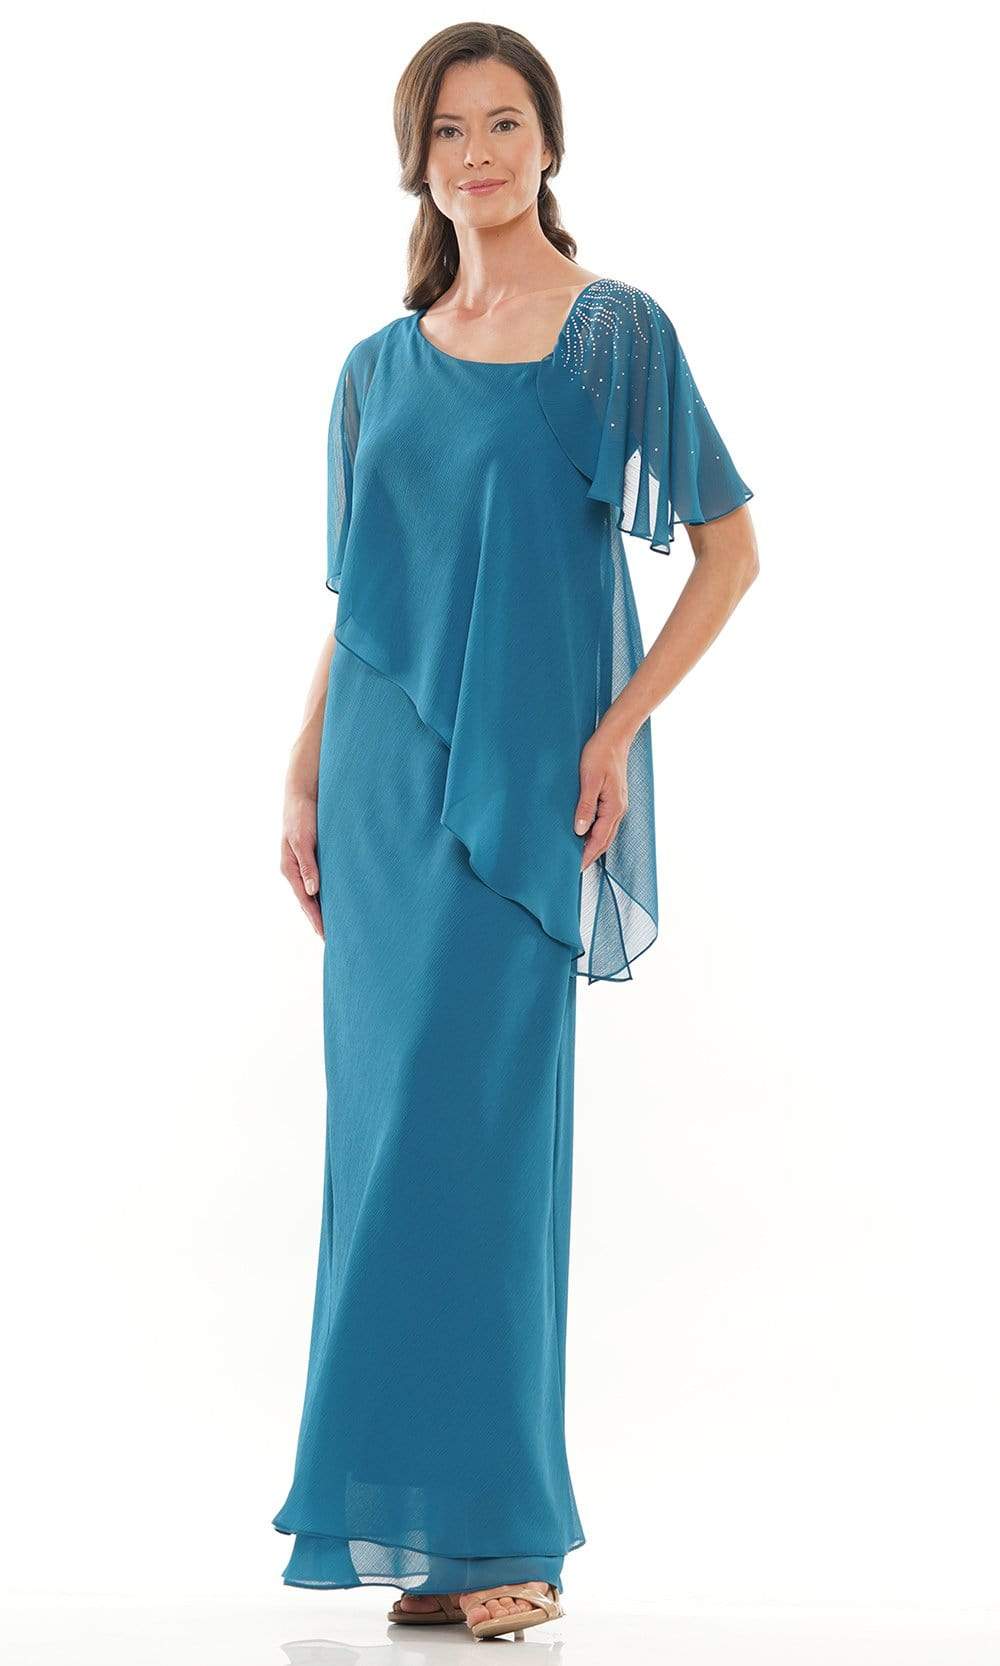 Marsoni by Colors - M313 Scoop Sheath Evening Dress Mother of the Bride Dresses 6 / Teal